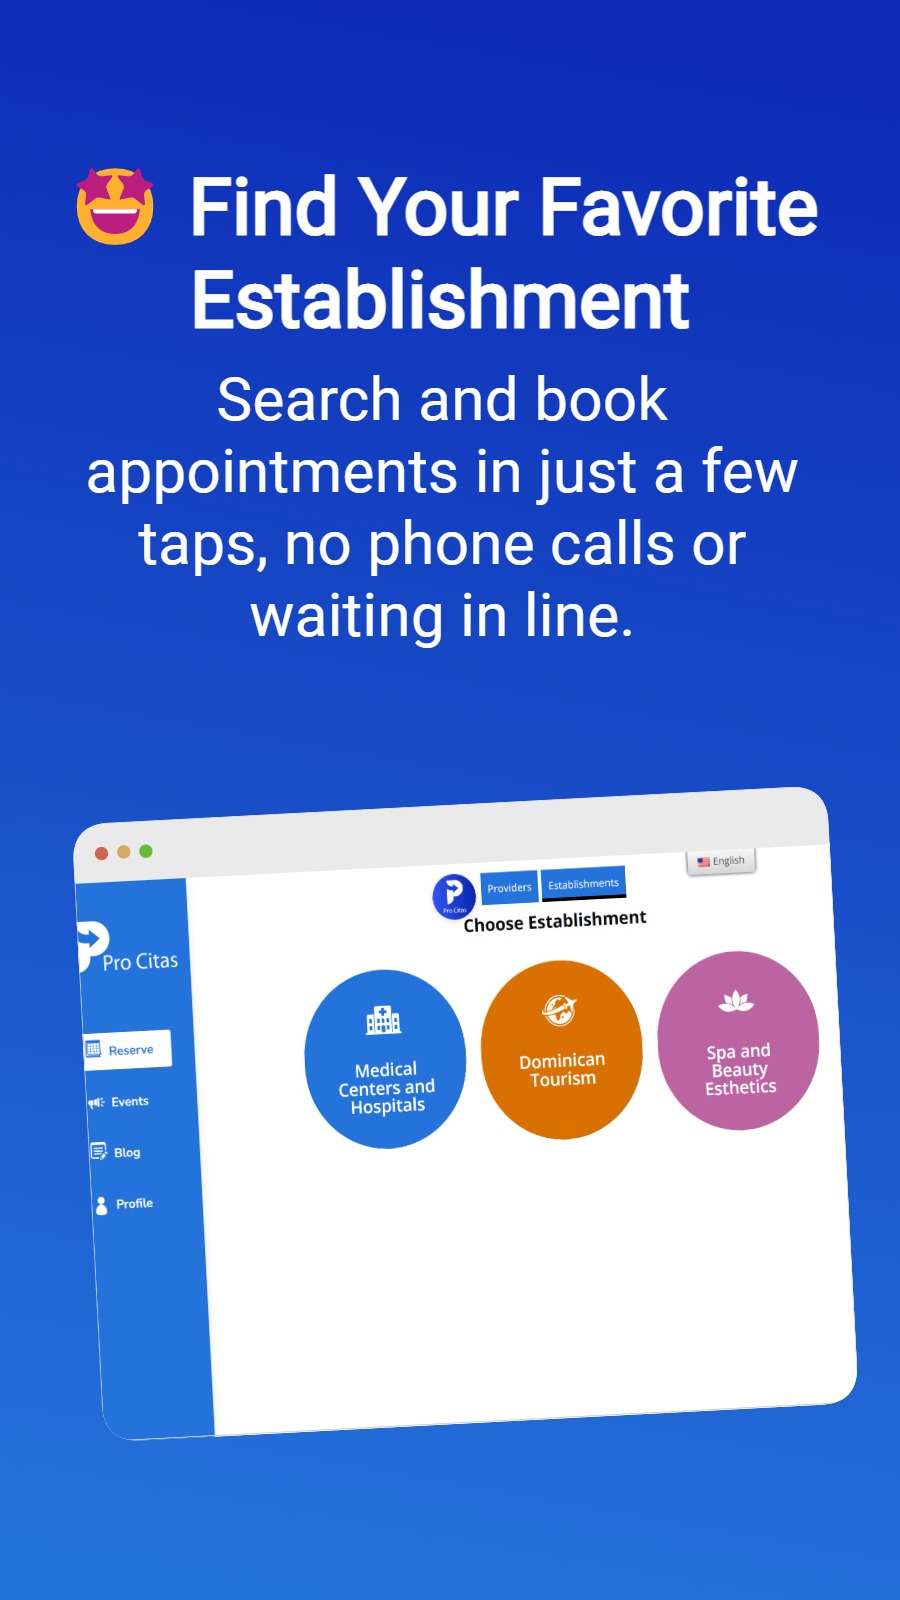 🤩 Find Your Favorite Establishment - Search and book appointments in just a few taps, no phone calls or waiting in line.